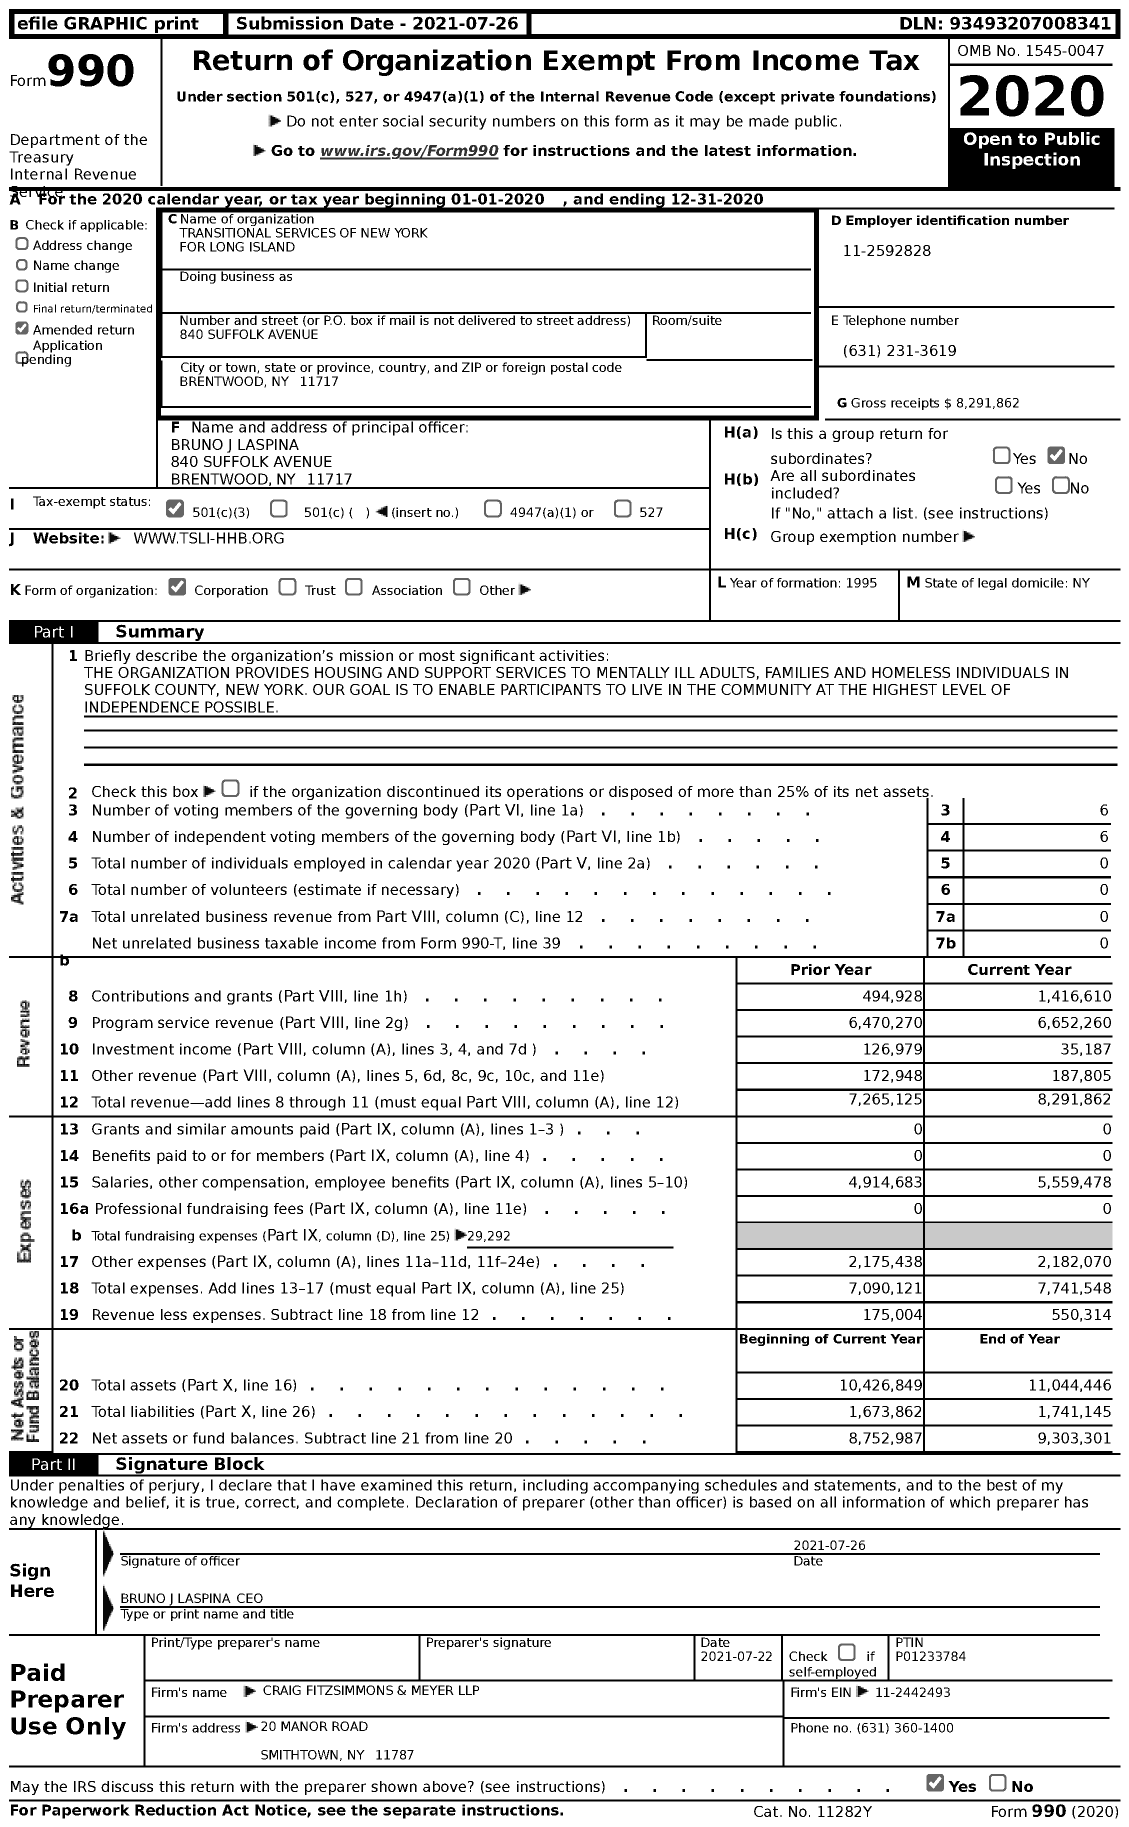 Image of first page of 2020 Form 990 for Transitional Services of New York for Long Island (TSLI)